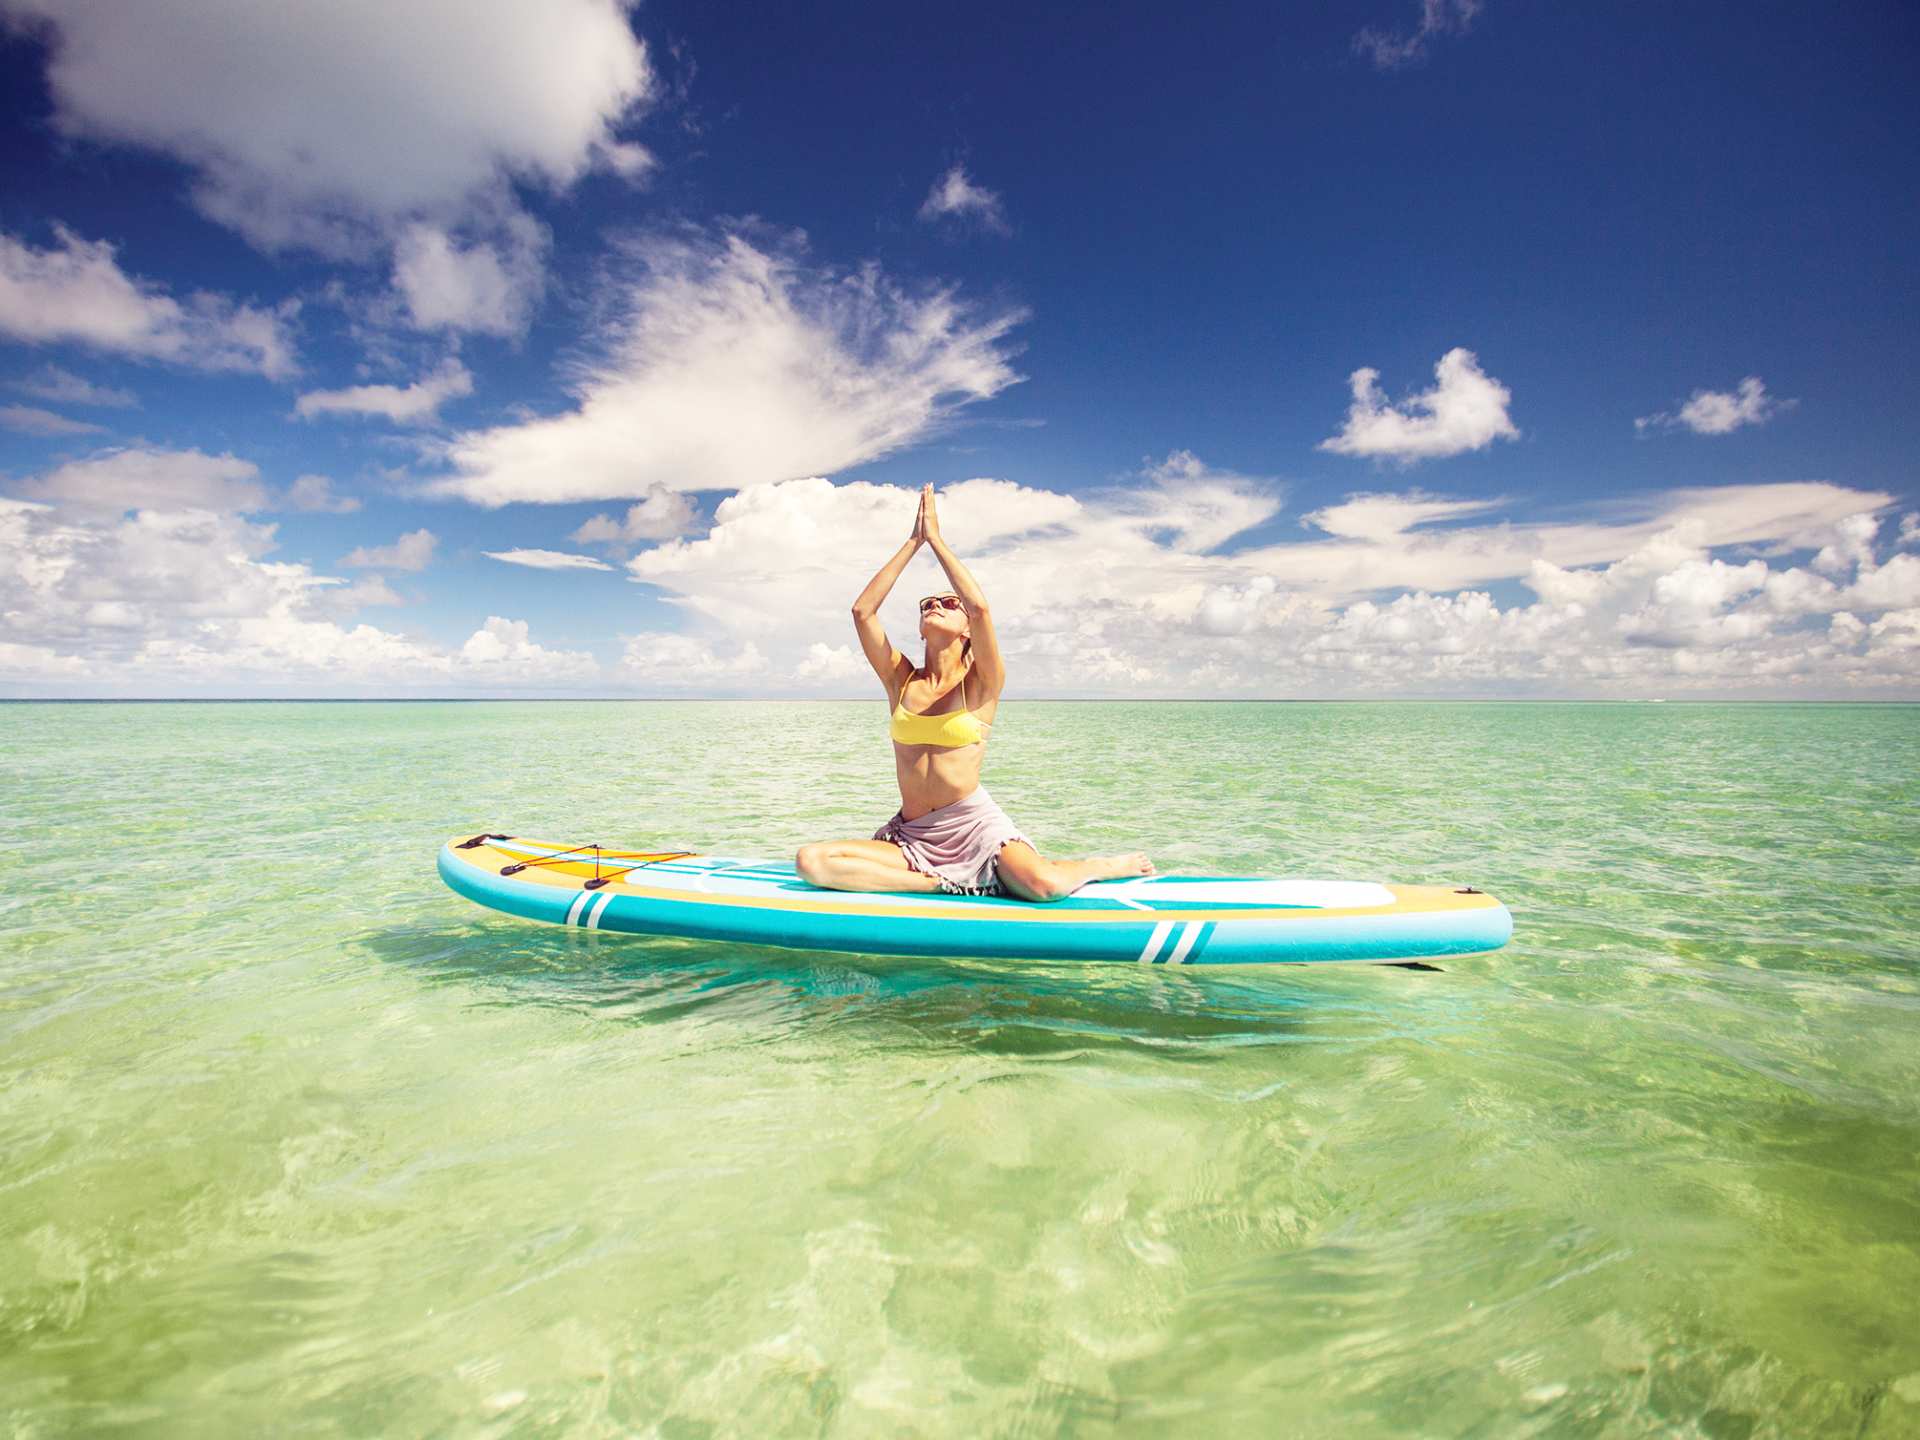 The Florida Keys | Stand up paddle board yoga in the Lower Keys